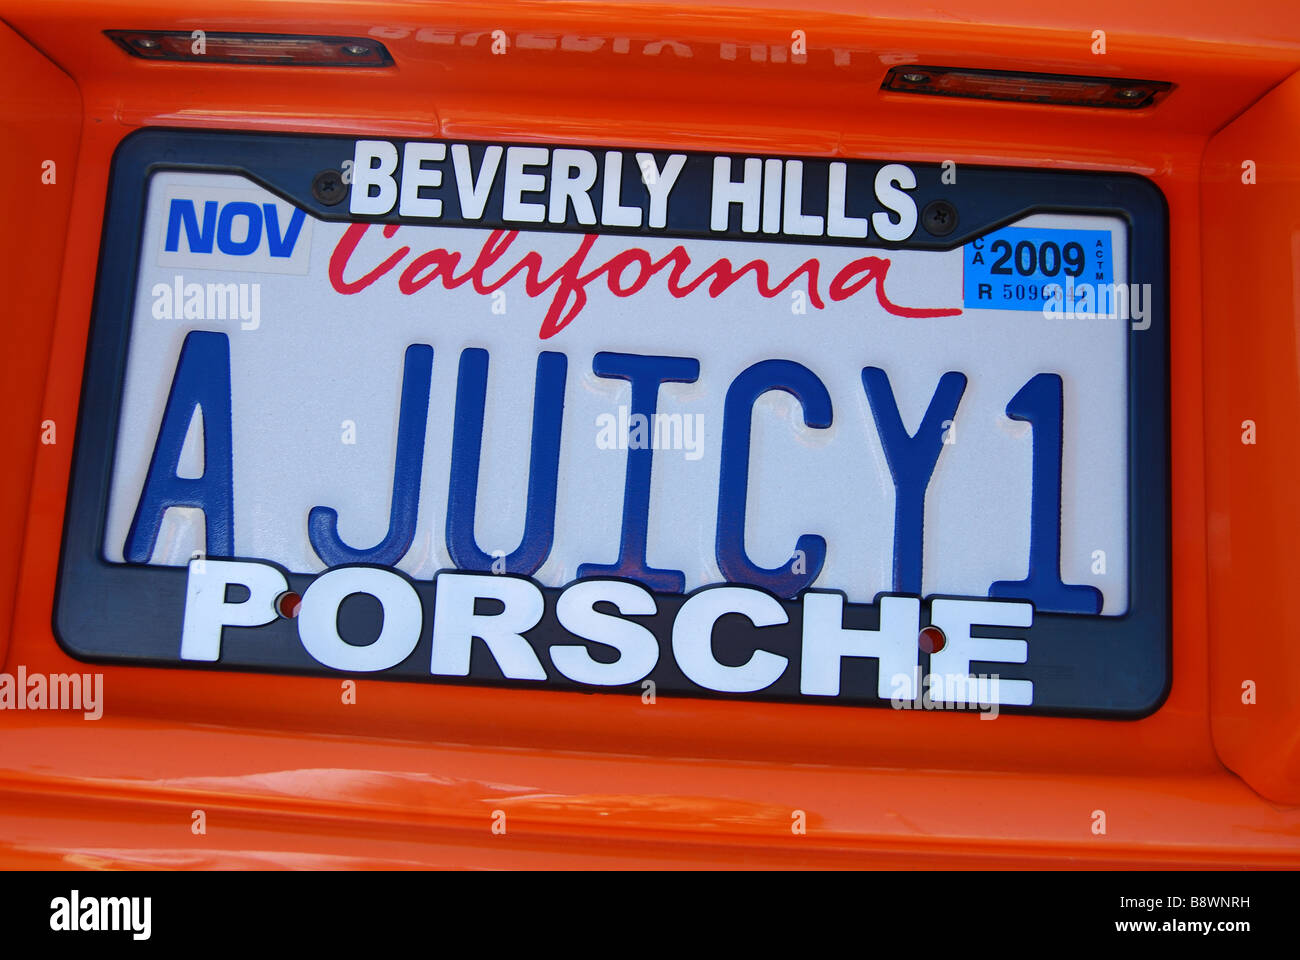 Personalised number plate, Marina del Rey, Los Angeles, California, United States of America Stock Photo